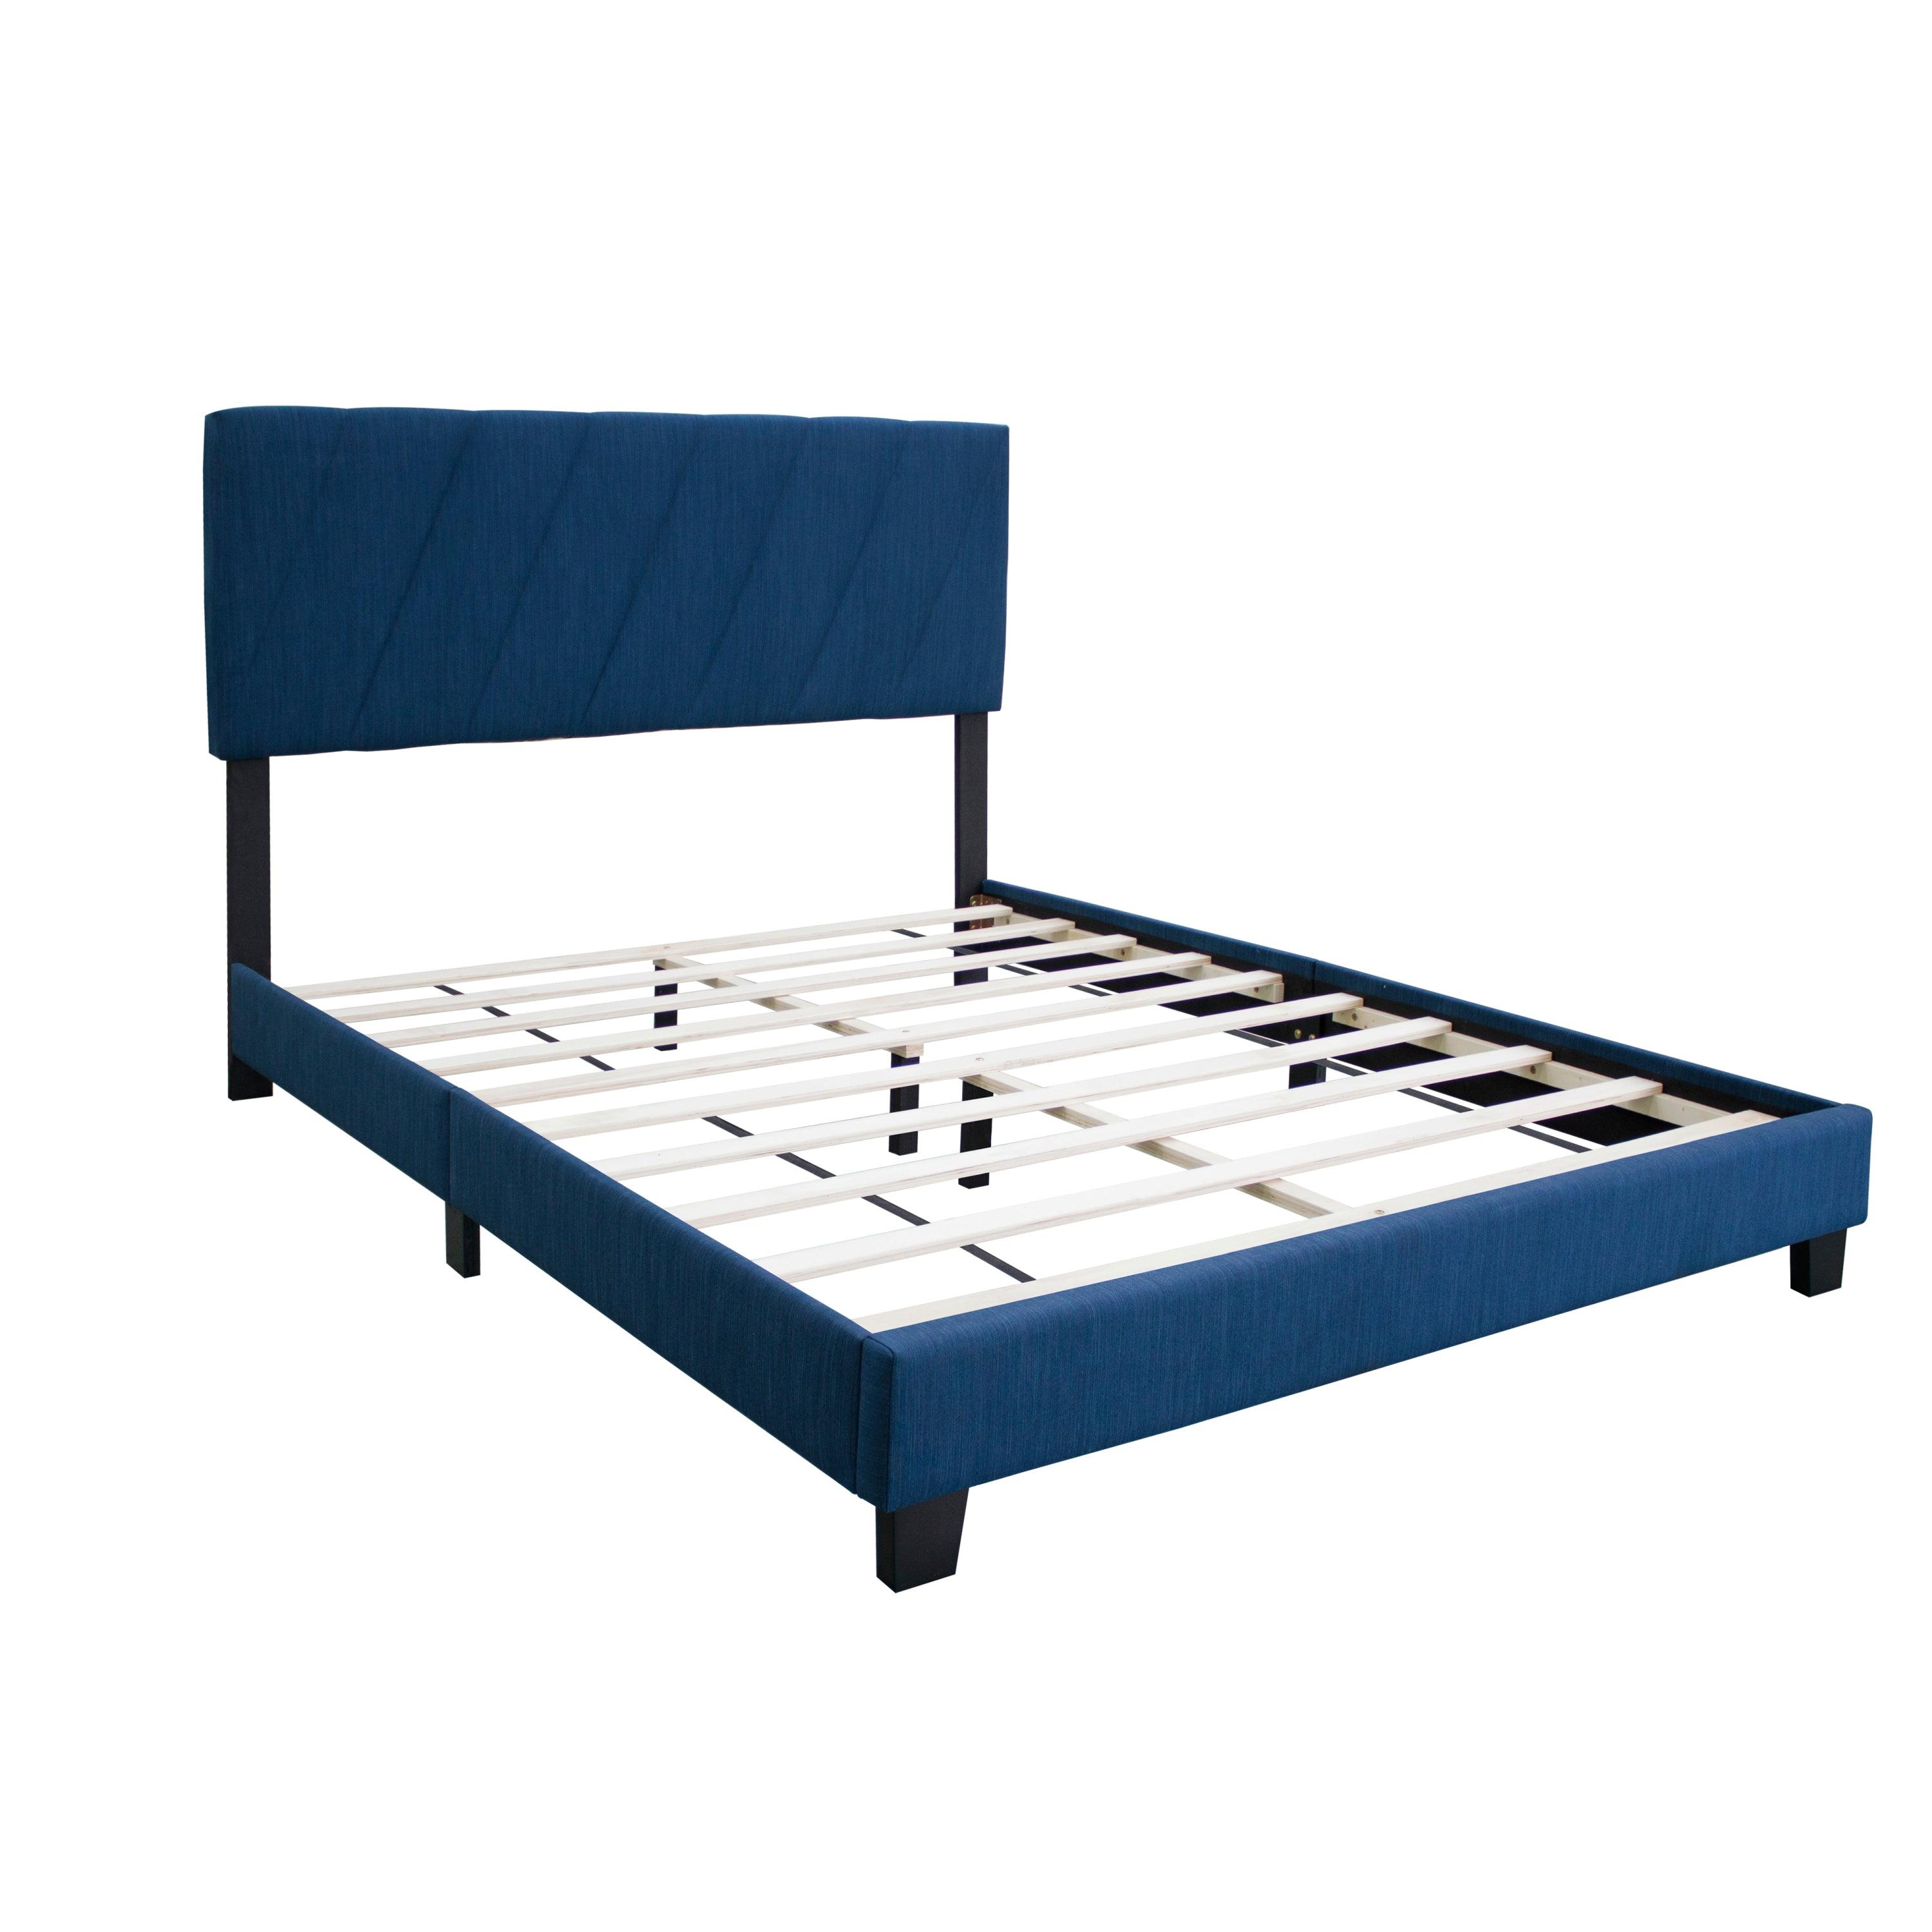 🆓🚛 Queen Adjustable Upholstered Bed Frame, Modern Minimalist Top Styles, Blue